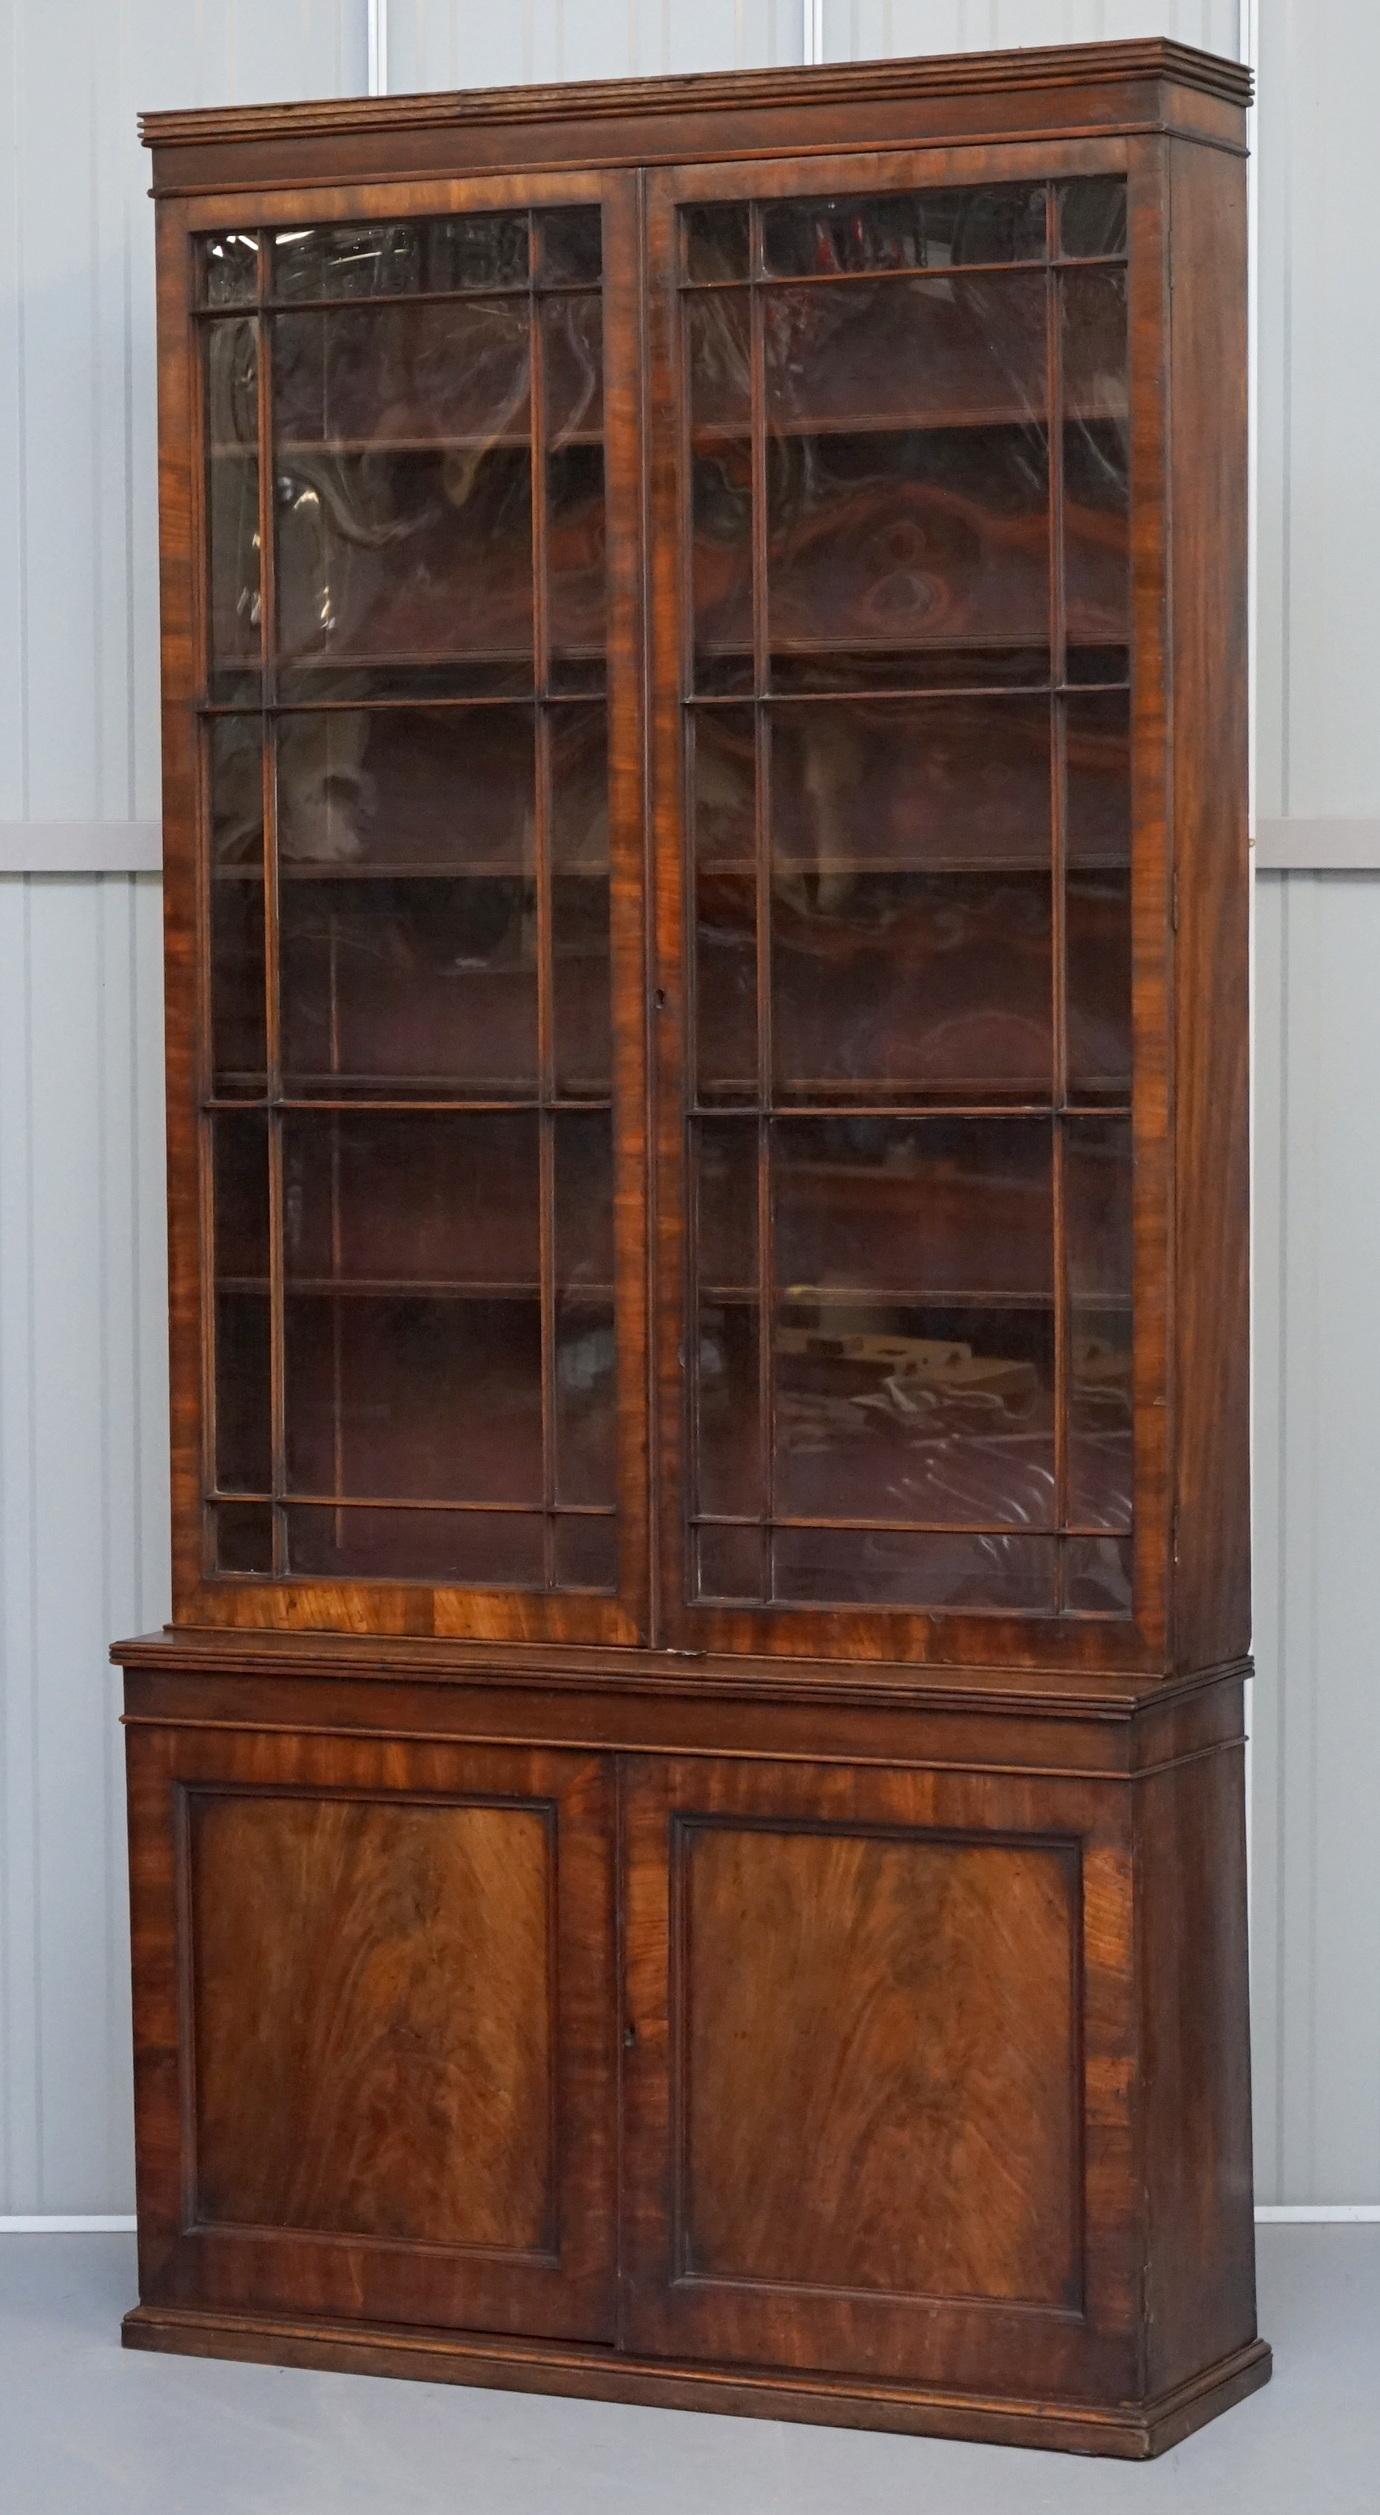 English Stunning Flamed Hardwood Large Astral Glazed Early Victorian Library Bookcase